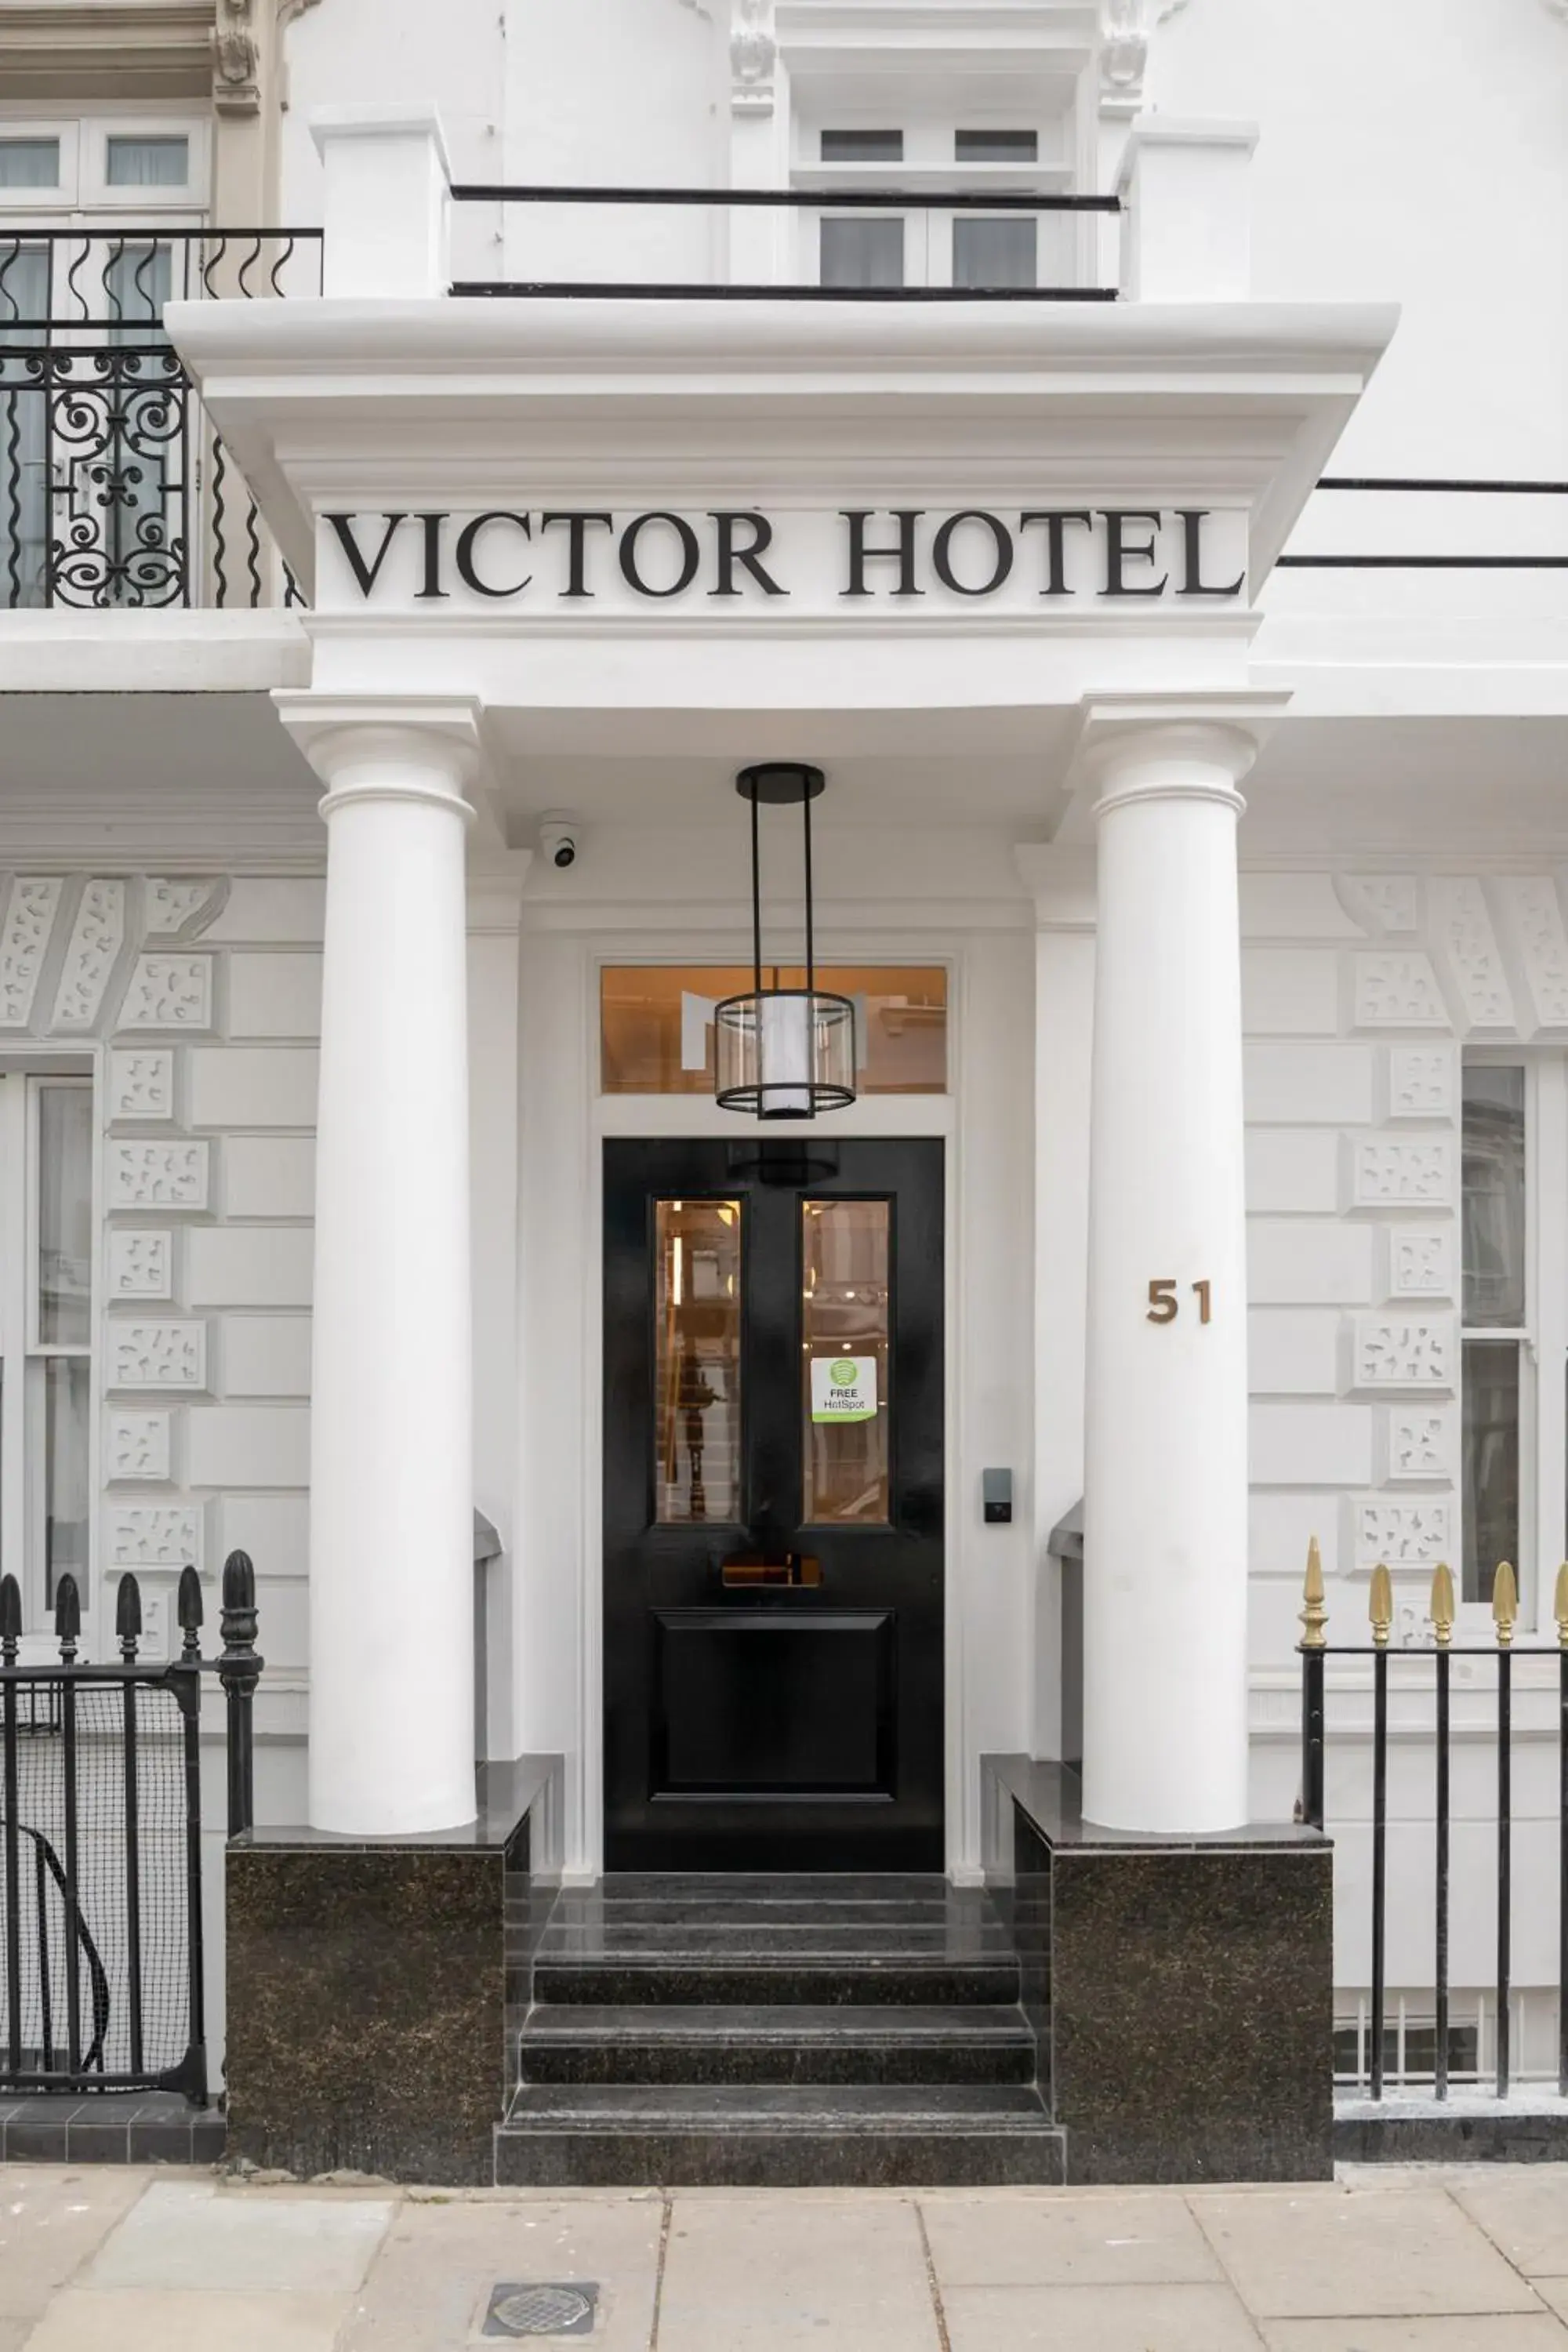 Property building in Victor Hotel - London Victoria